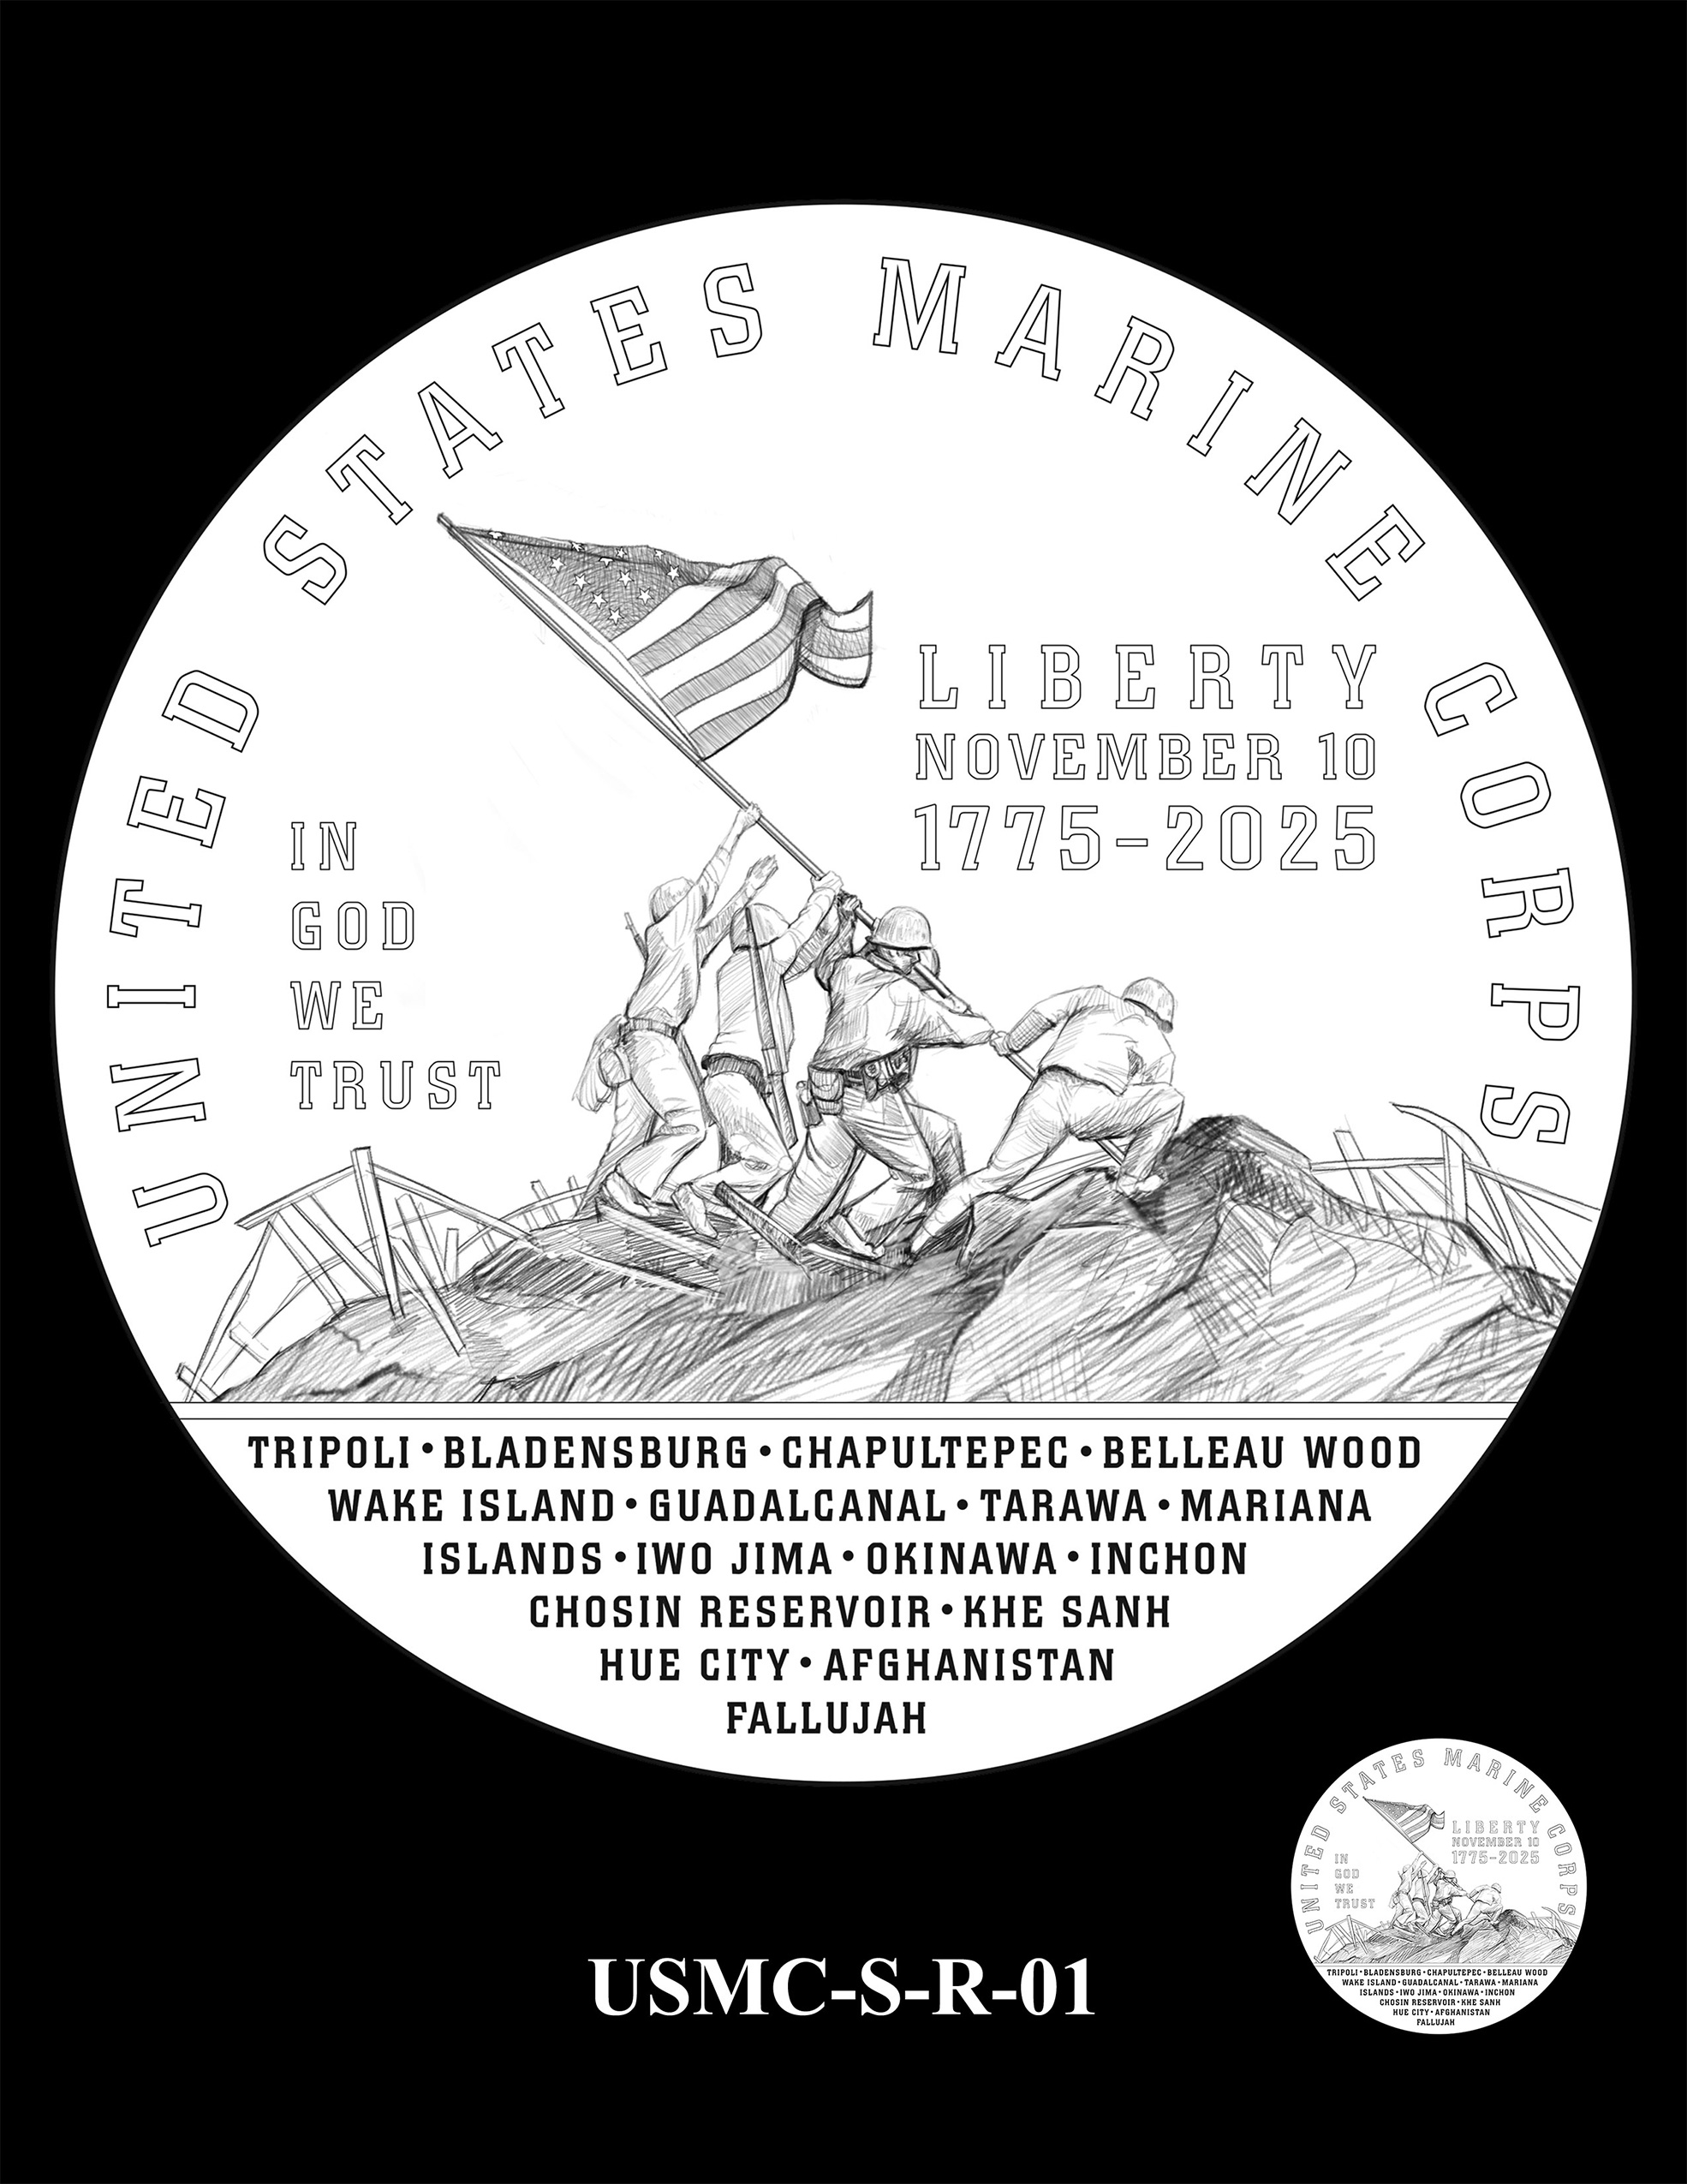 USMC-S-R-01 -- 250th Anniversary of the United States Marine Corps - Silver